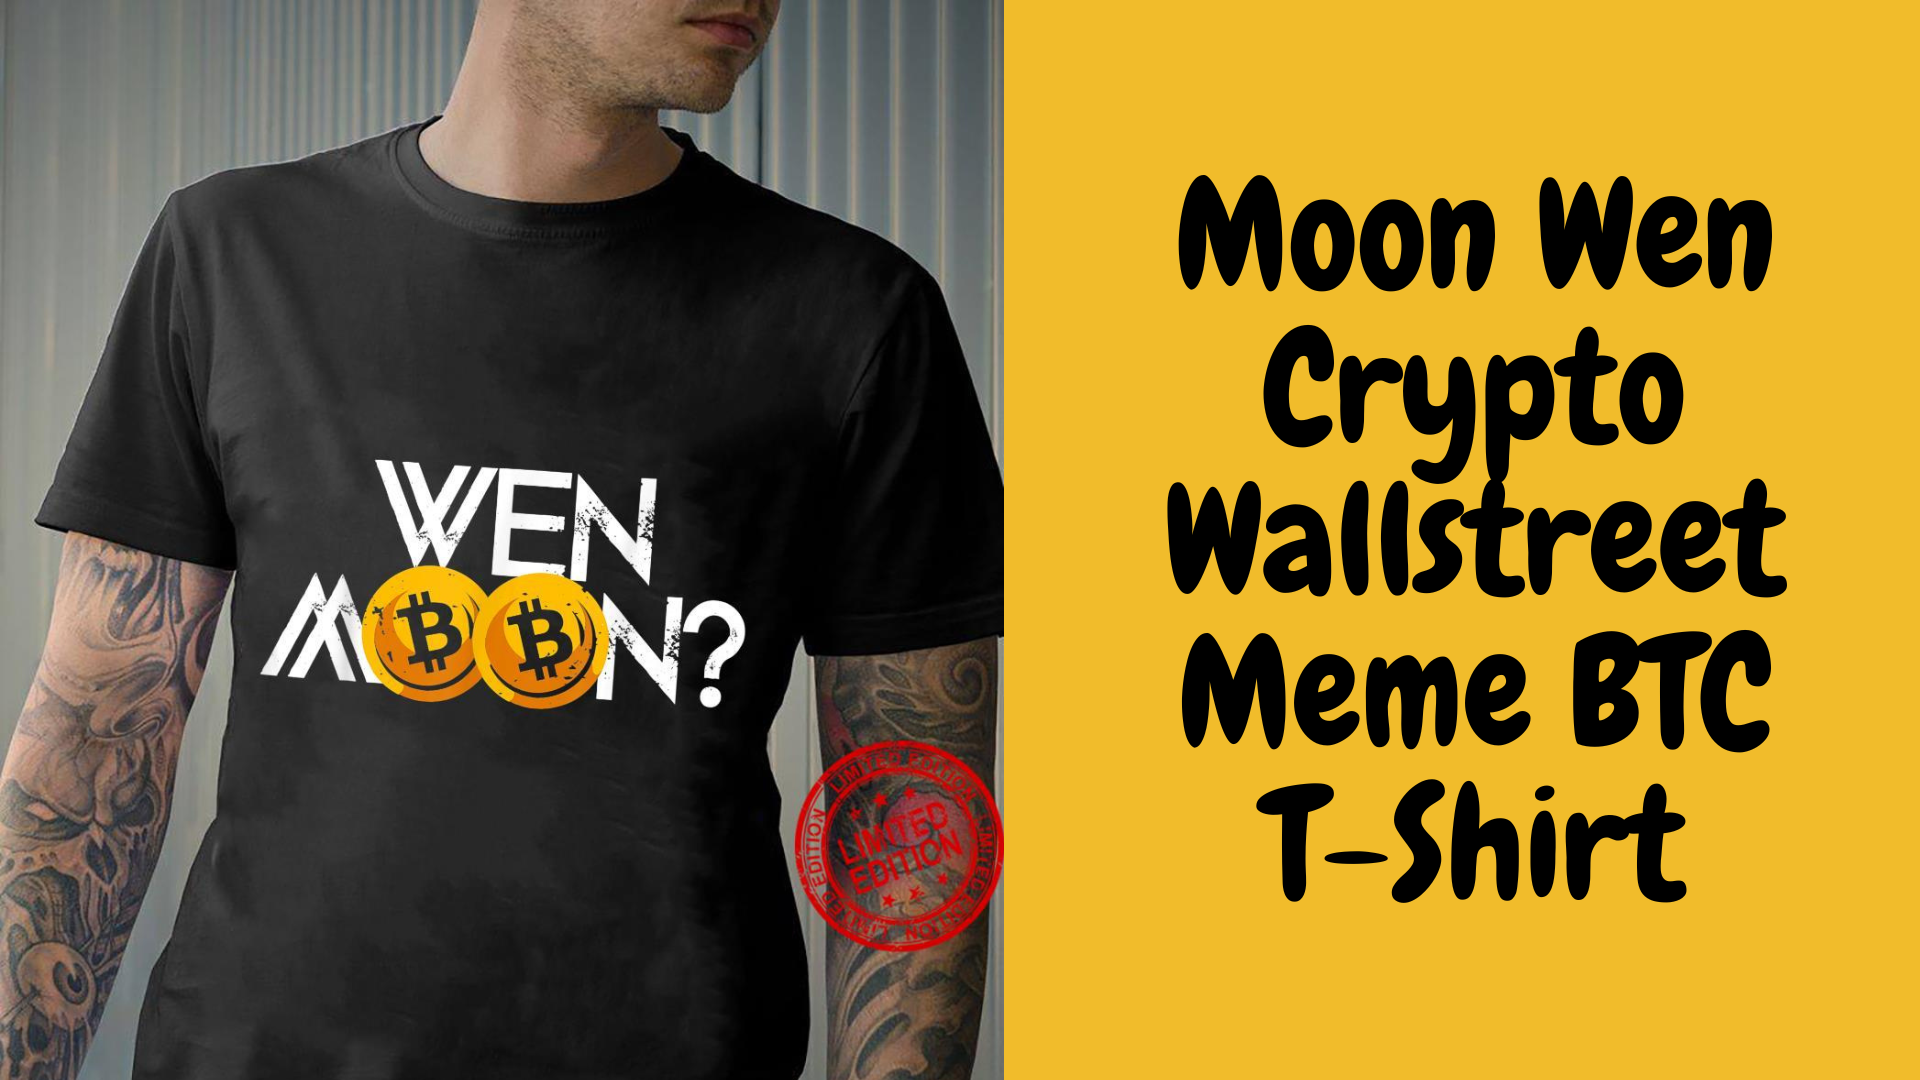 A man wearing a black shirt with words wen moon and bitcoins